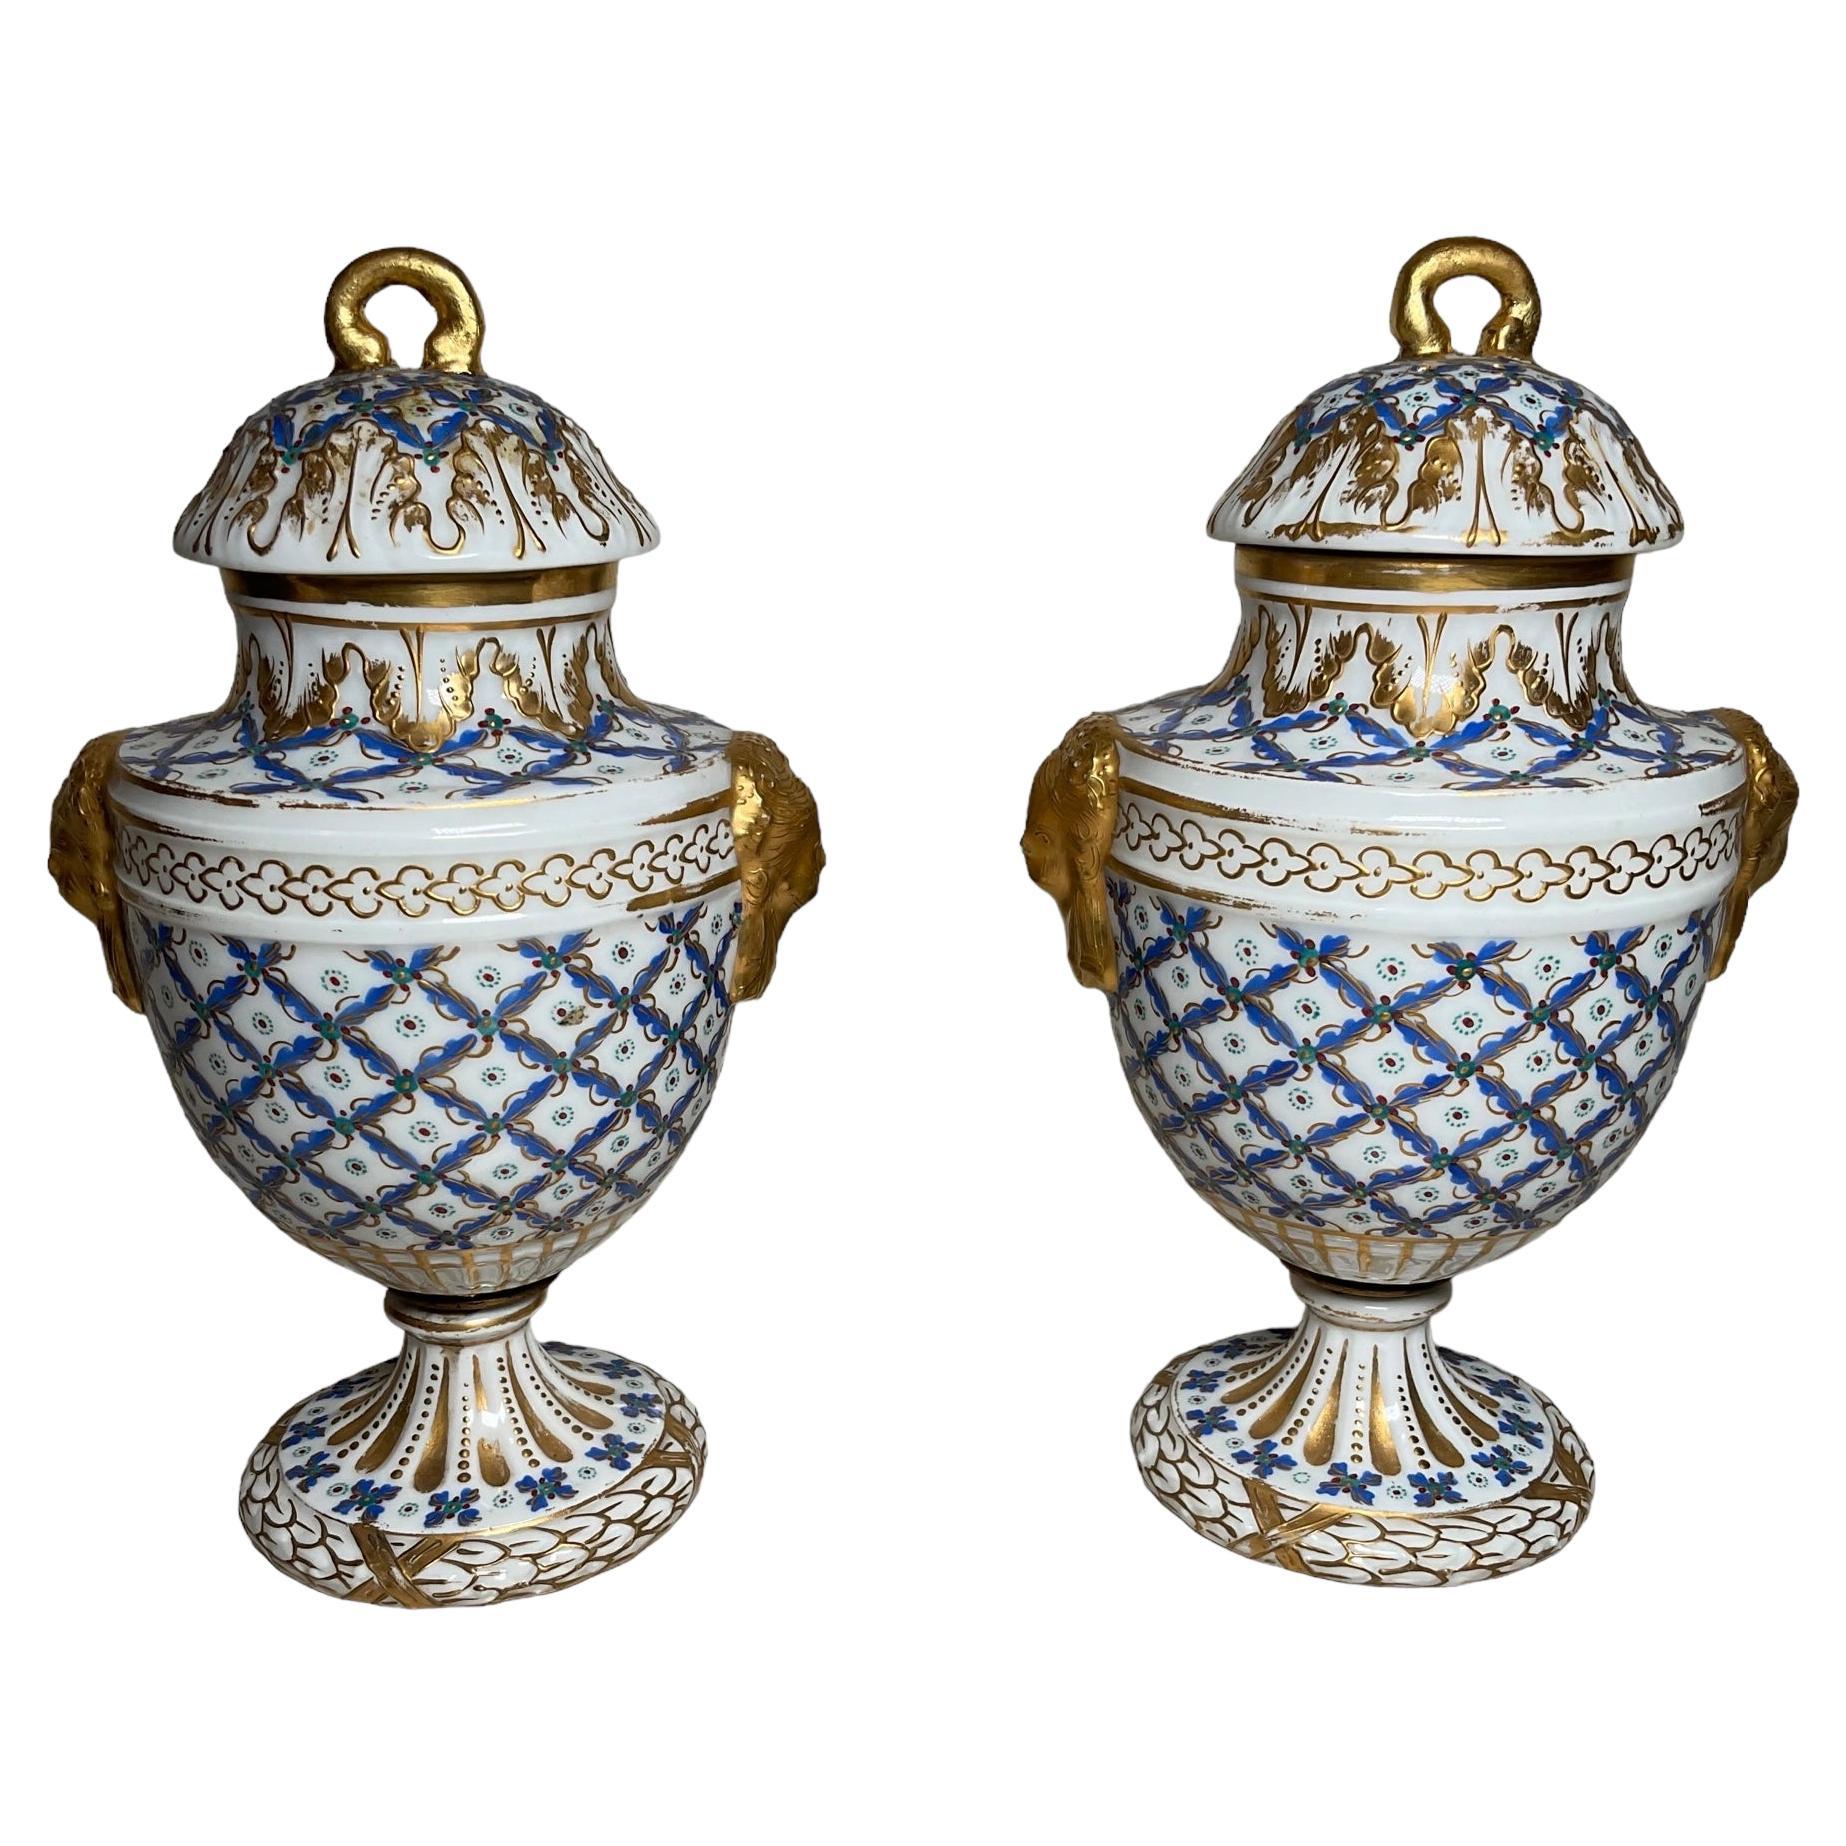 Pair of Sevres Porcelain Small Urns 